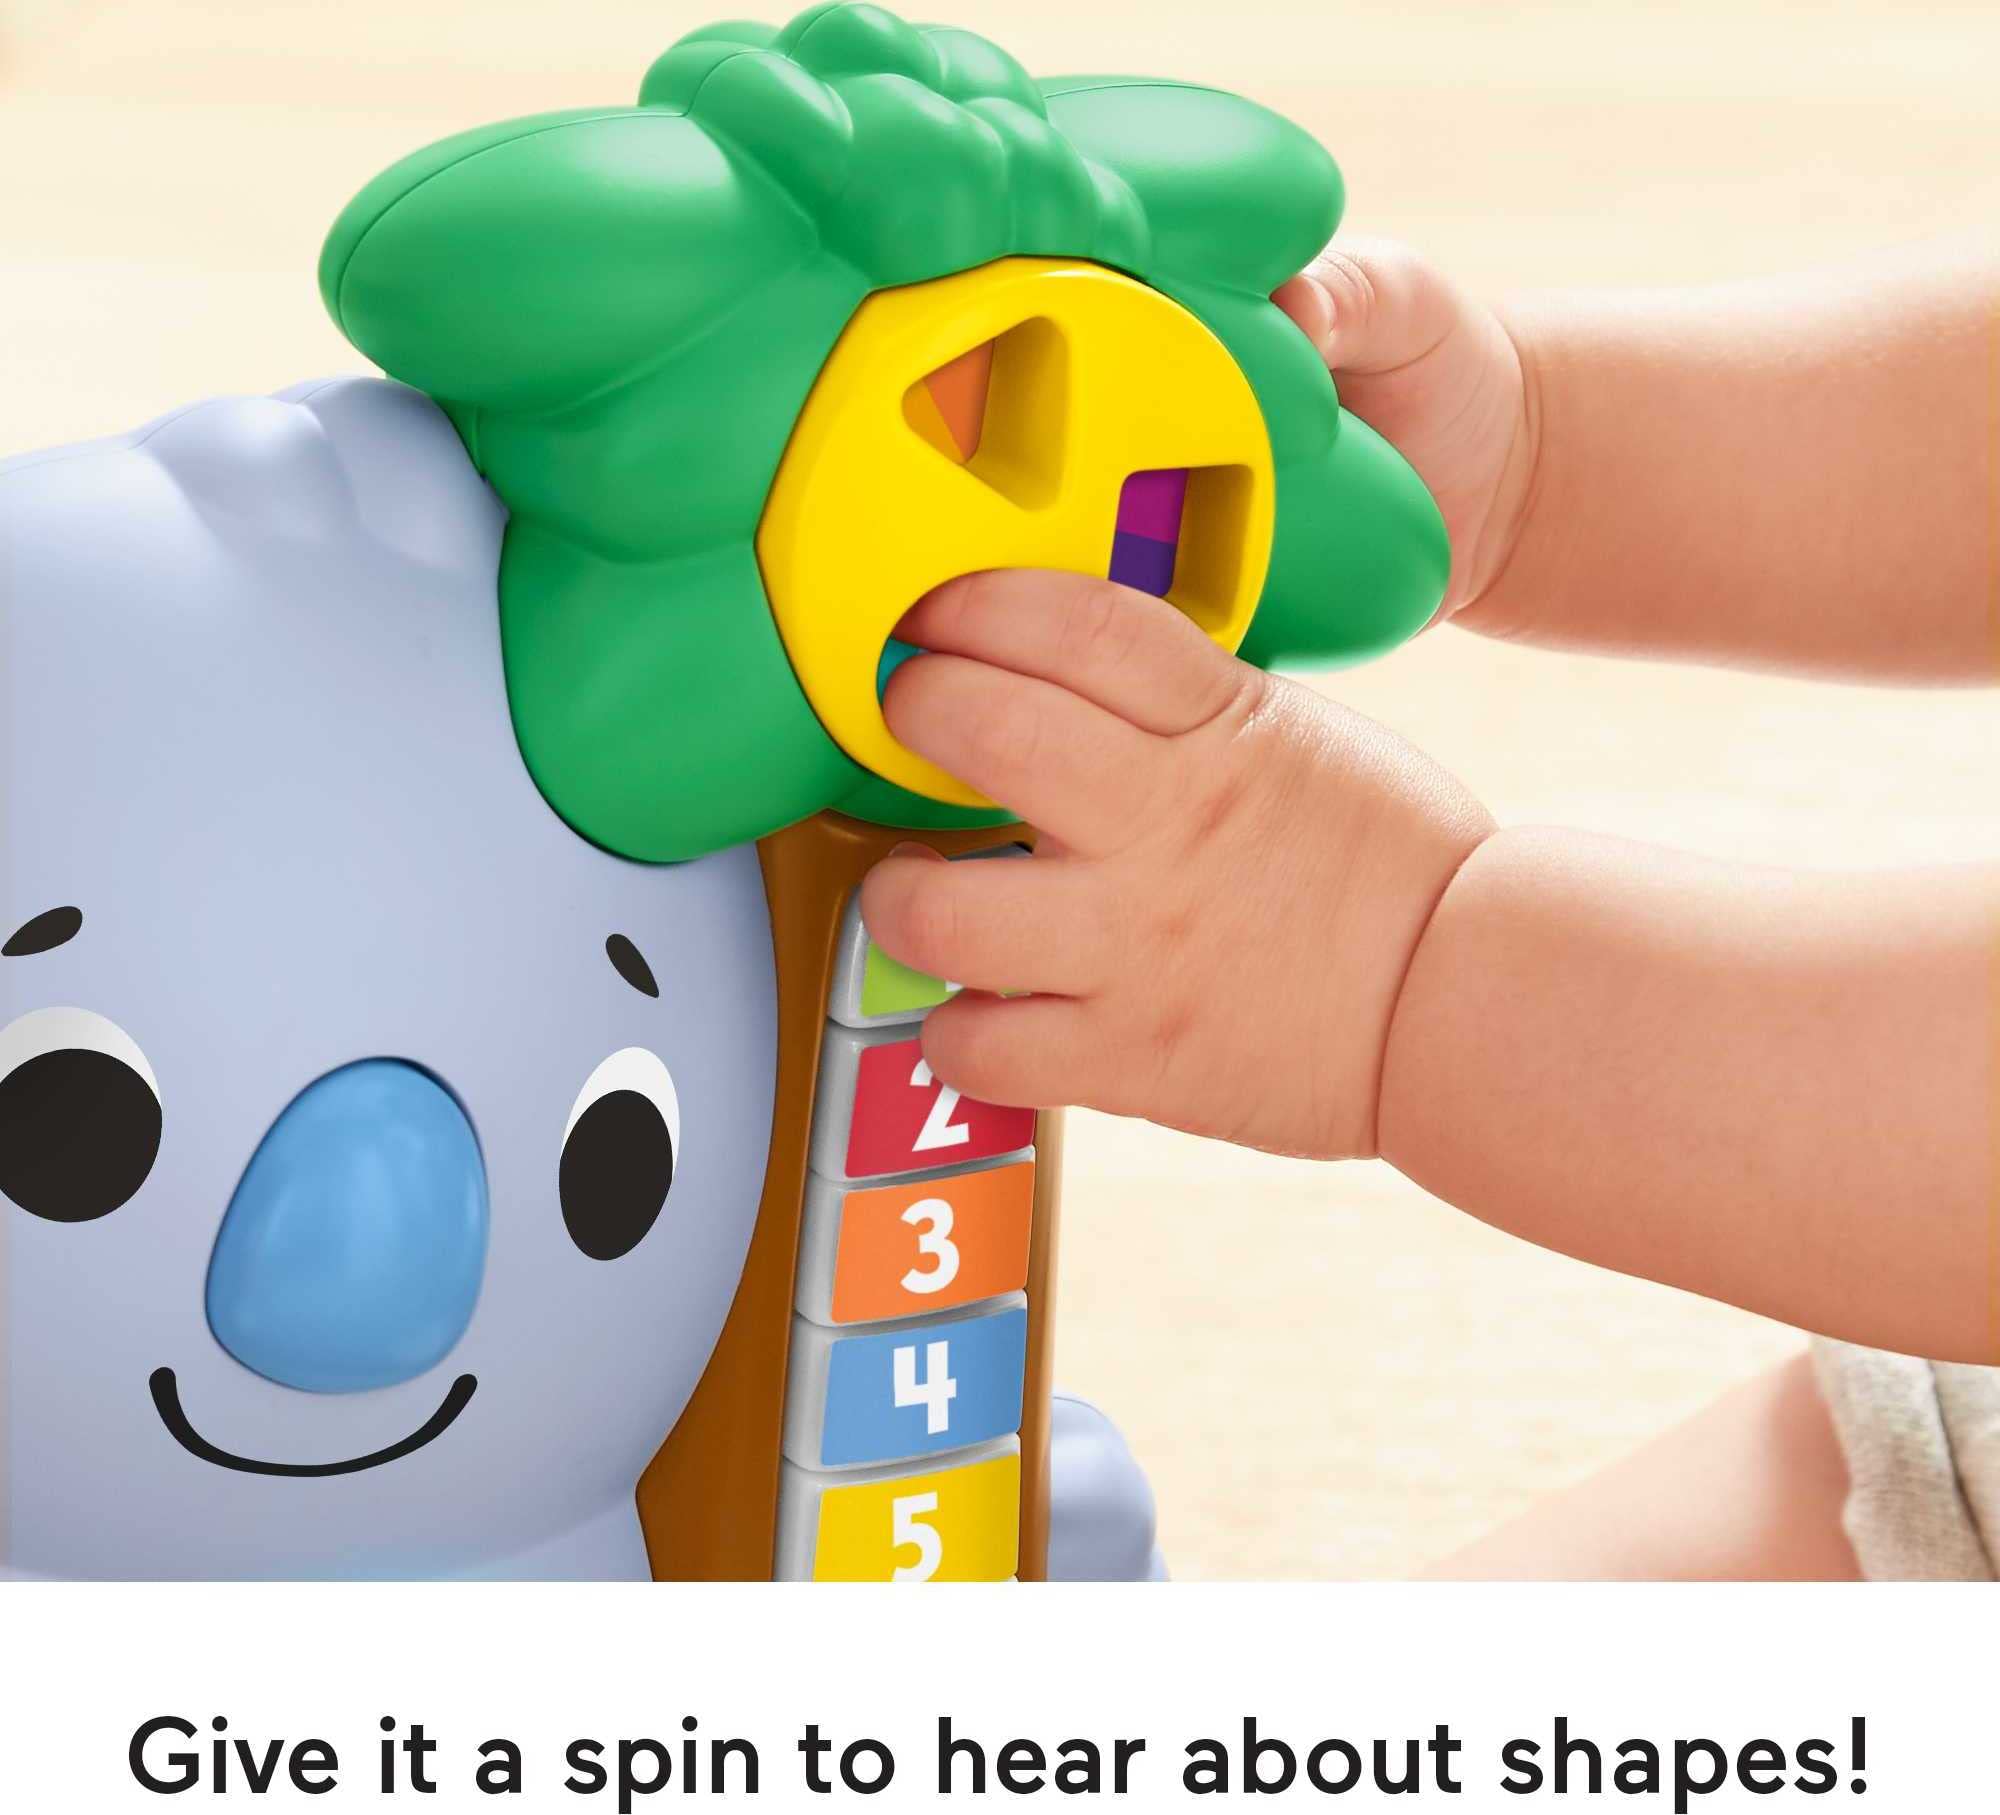 Fisher-Price Linkimals Counting Koala - UK English Edition, Animal-Themed Musical Learning Toy for Baby and Toddler Ages 9 Months and Older